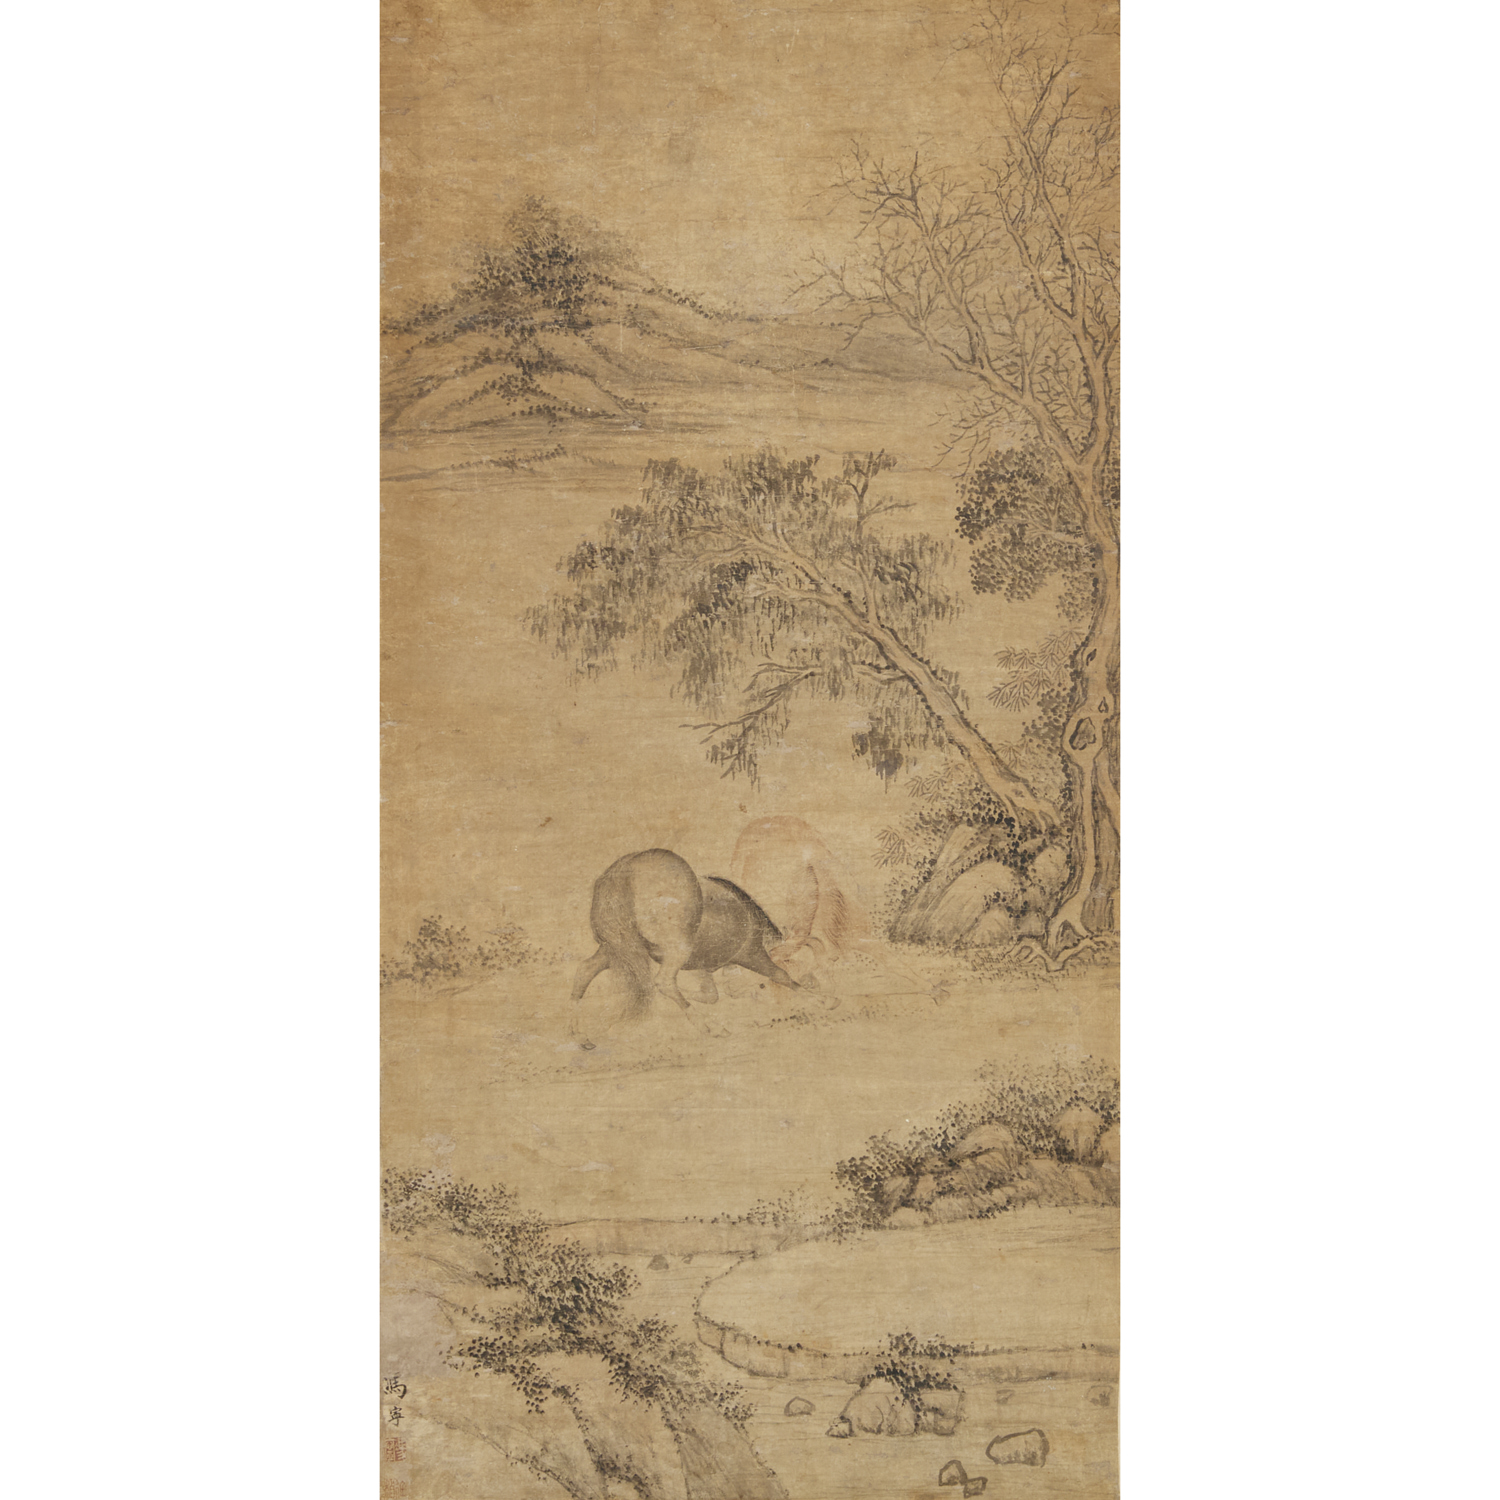 MARK OF FENG NING SCROLL PAINTING 3b45e2